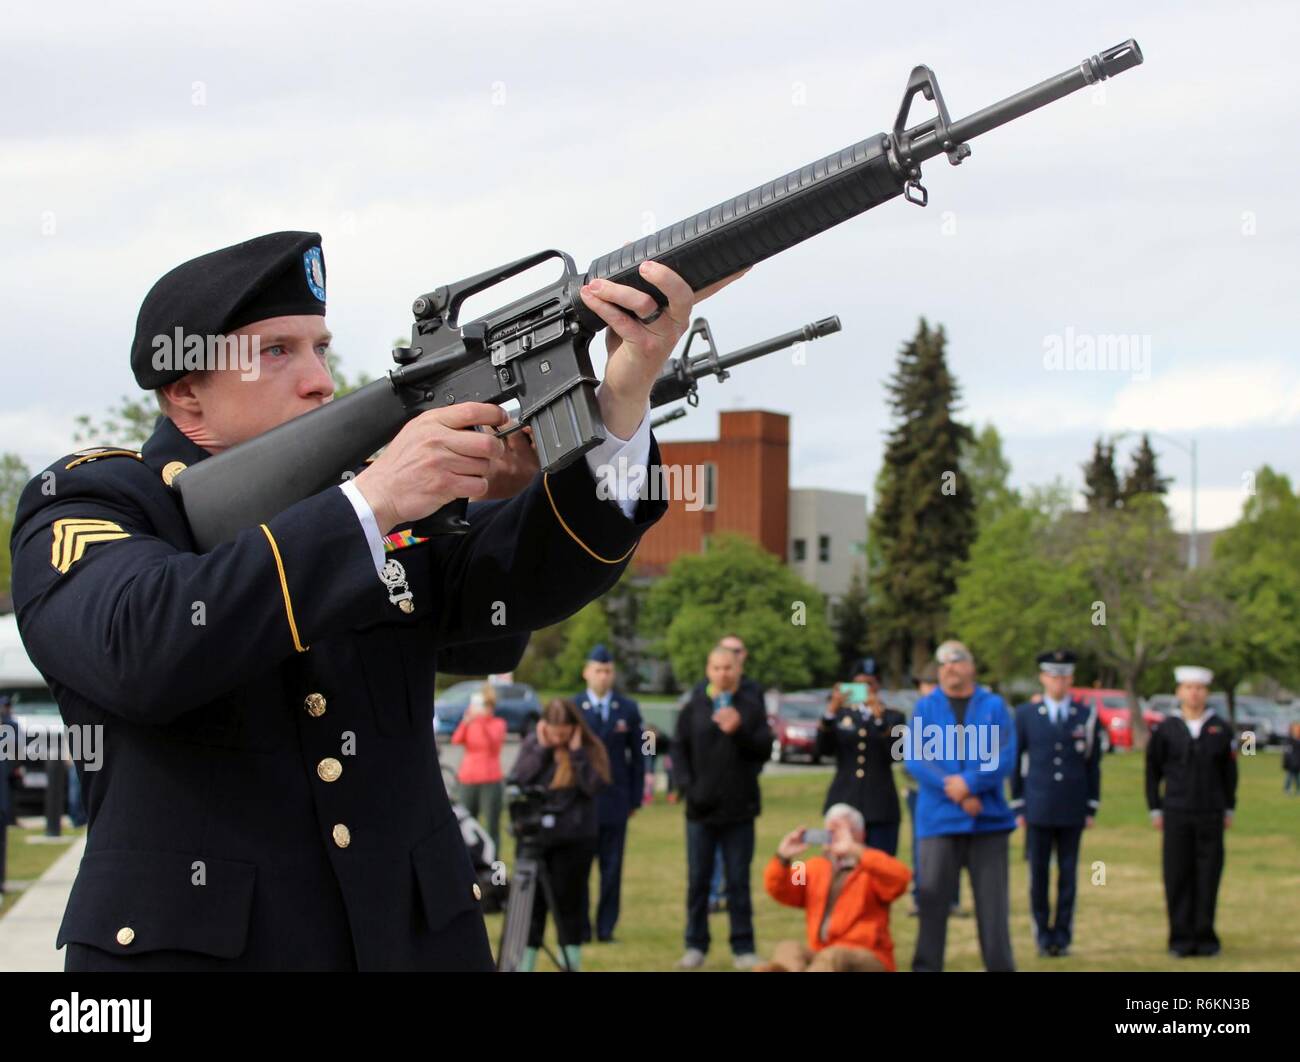 Sgt. William Hardin of Joint Base Elmendorf-Richardson’s 59th Signal Battalion fires his weapon as part of a 21-gun salute May 29 at a Memorial Day ceremony on the Delaney Park Strip in Anchorage, Alaska. Stock Photo